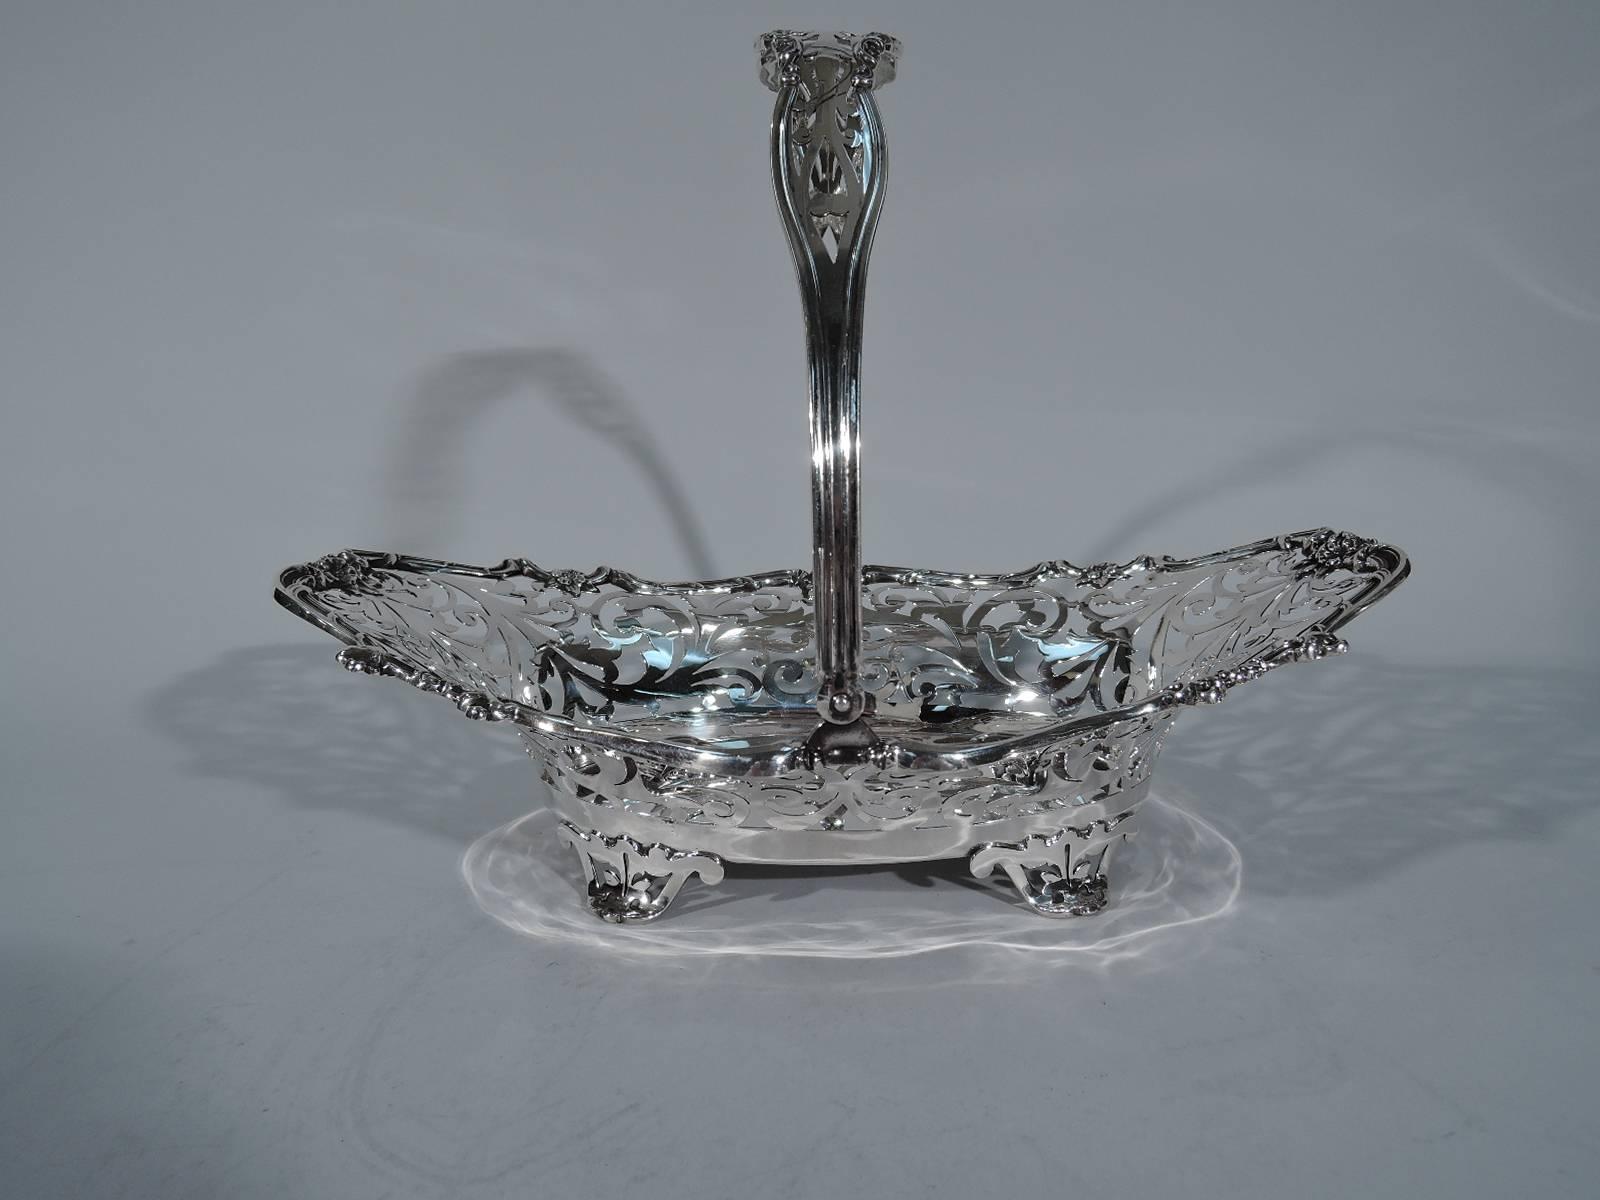 Edwardian sterling silver basket. Made by Wilcox & Wagoner (later Watson) in New York, circa 1900. Solid oval well. Flared and asymmetrical sides with bold pierced and stylized scrolls and leaves. Rim comprises joined scrolls with pretty flowers.